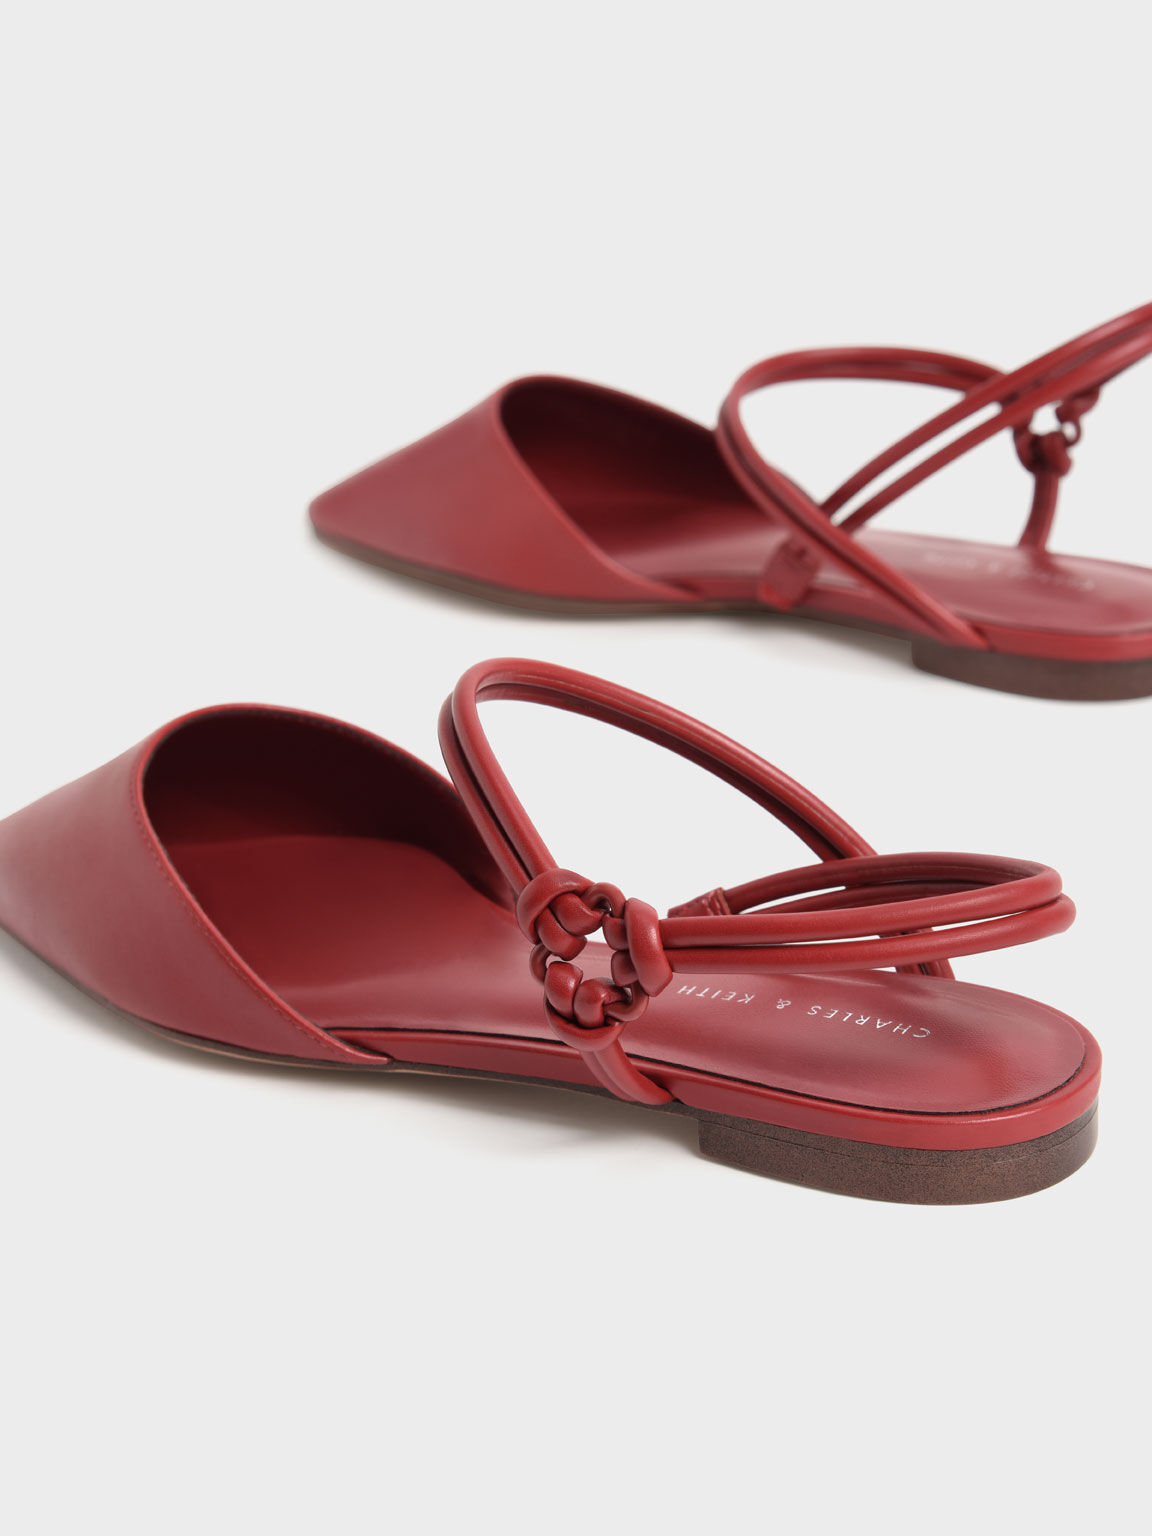 Knotted Ankle-Strap Ballerina Flats, Red, hi-res